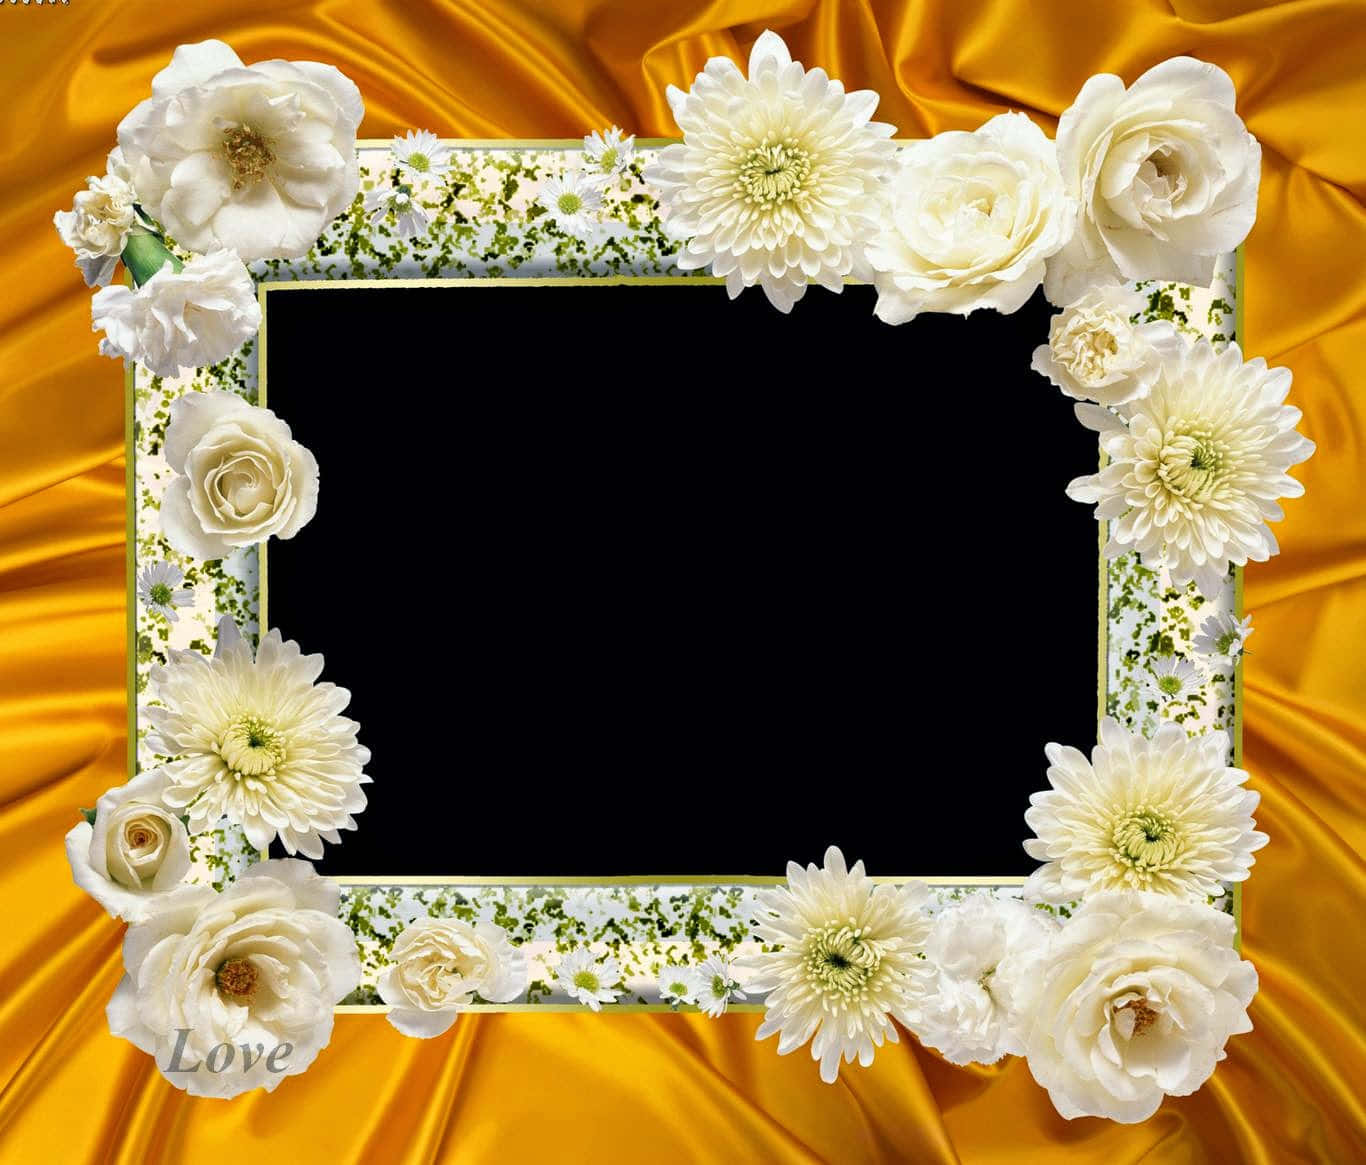 White Floral Picture Frame On Yellow Cloth Background